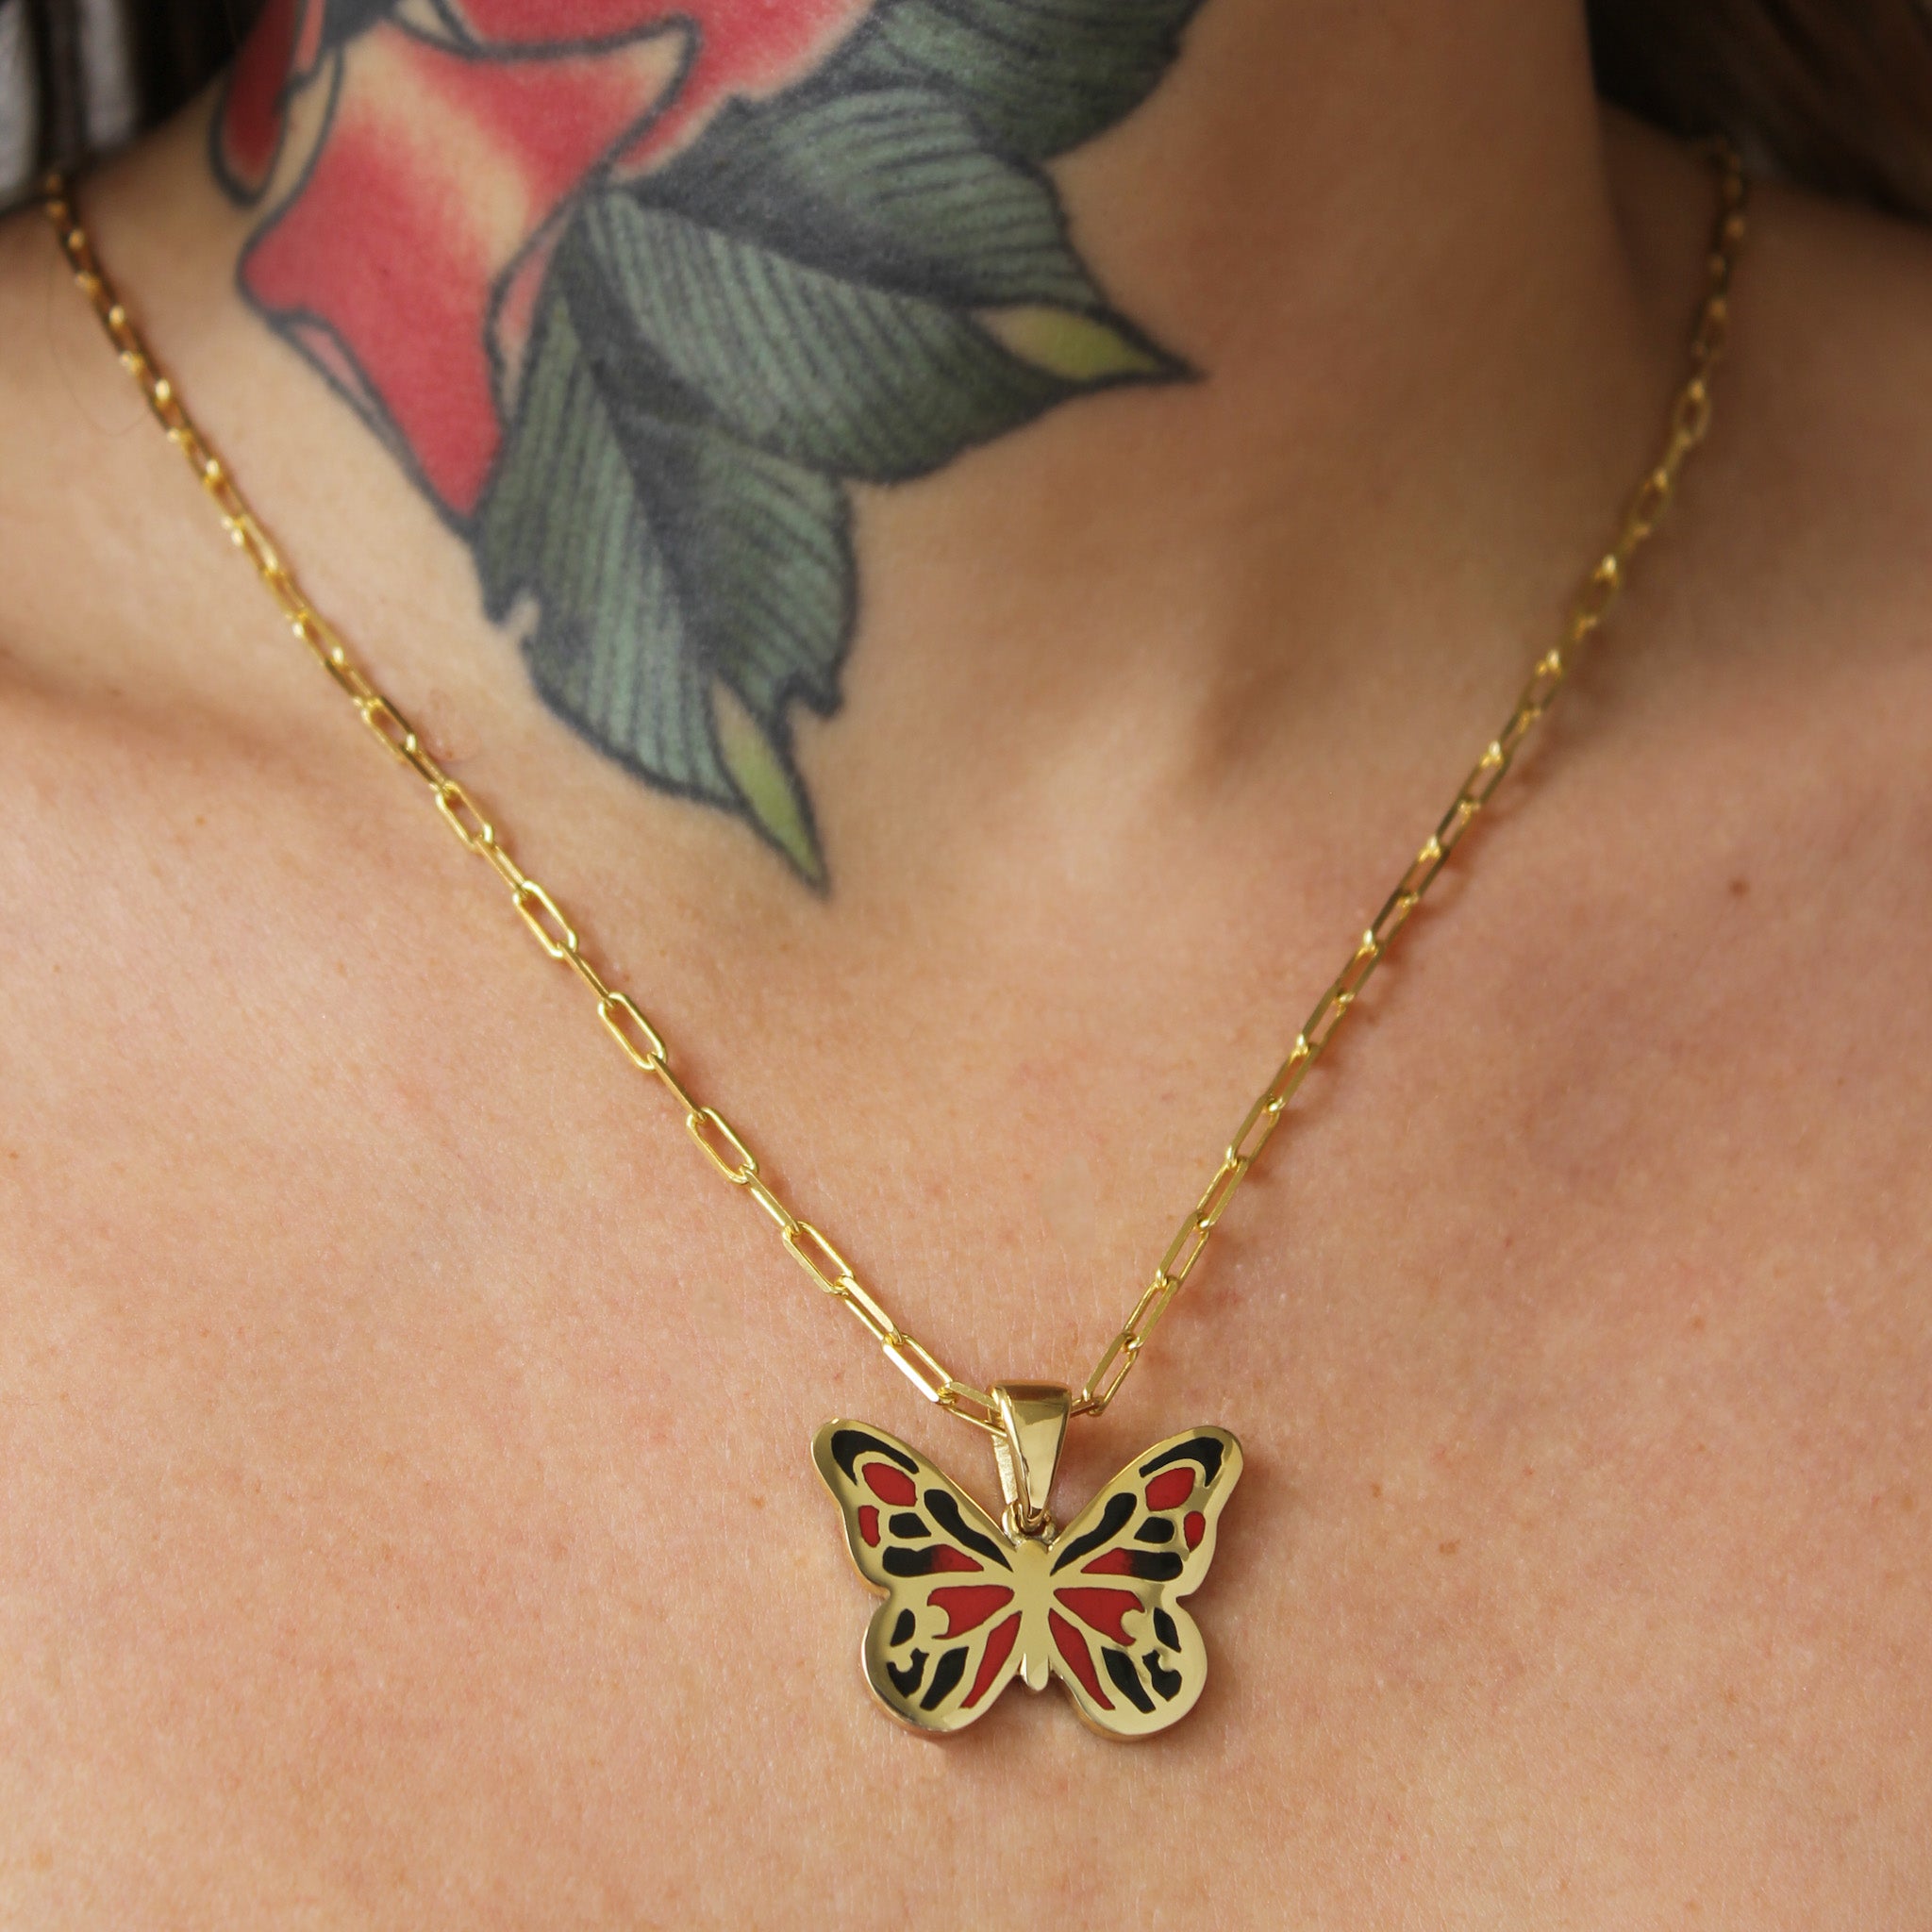 Model wearing the butterfly pendant on a delicate gold chain, creating a striking and unique look.